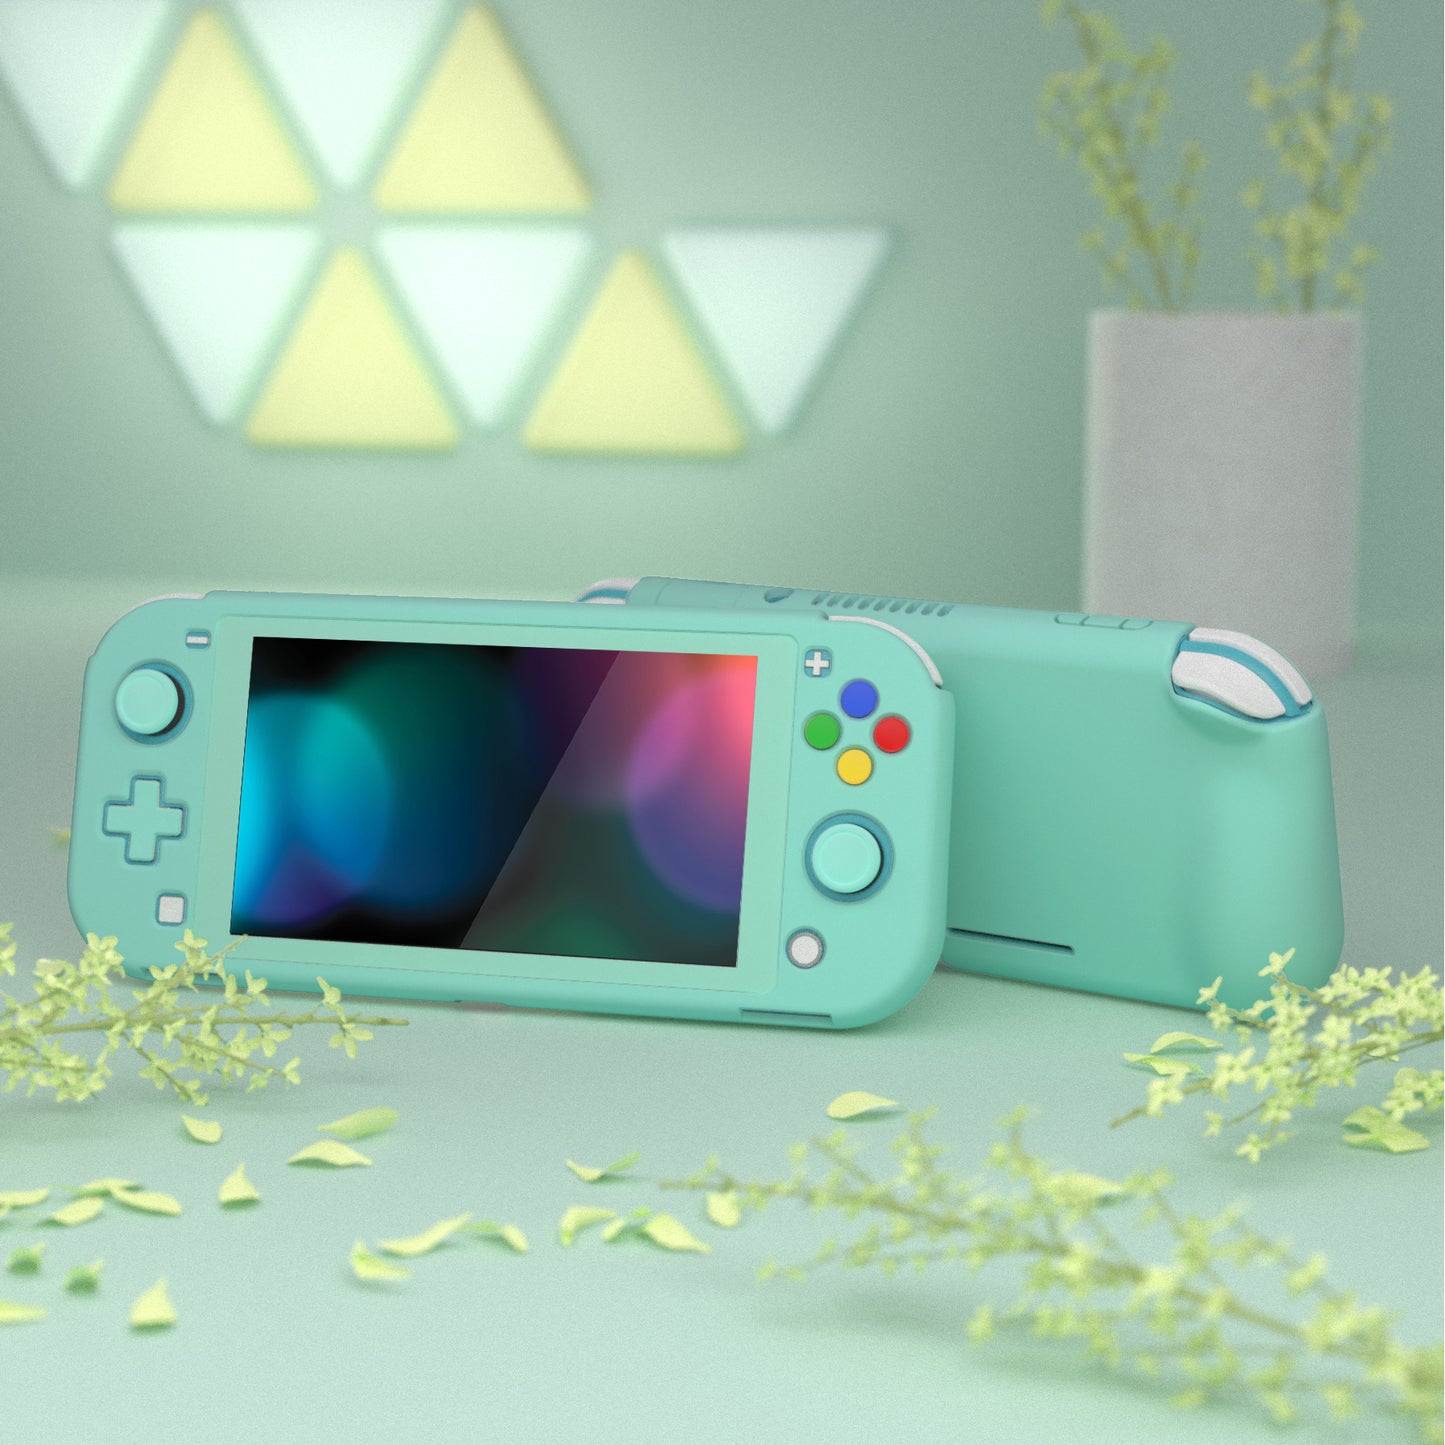 PlayVital ZealProtect Protective Case for Nintendo Switch Lite, Hard Shell Ergonomic Grip Cover for Nintendo Switch Lite w/Screen Protector & Thumb Grip Caps & Button Caps - Misty Green - PSLYP3005 playvital